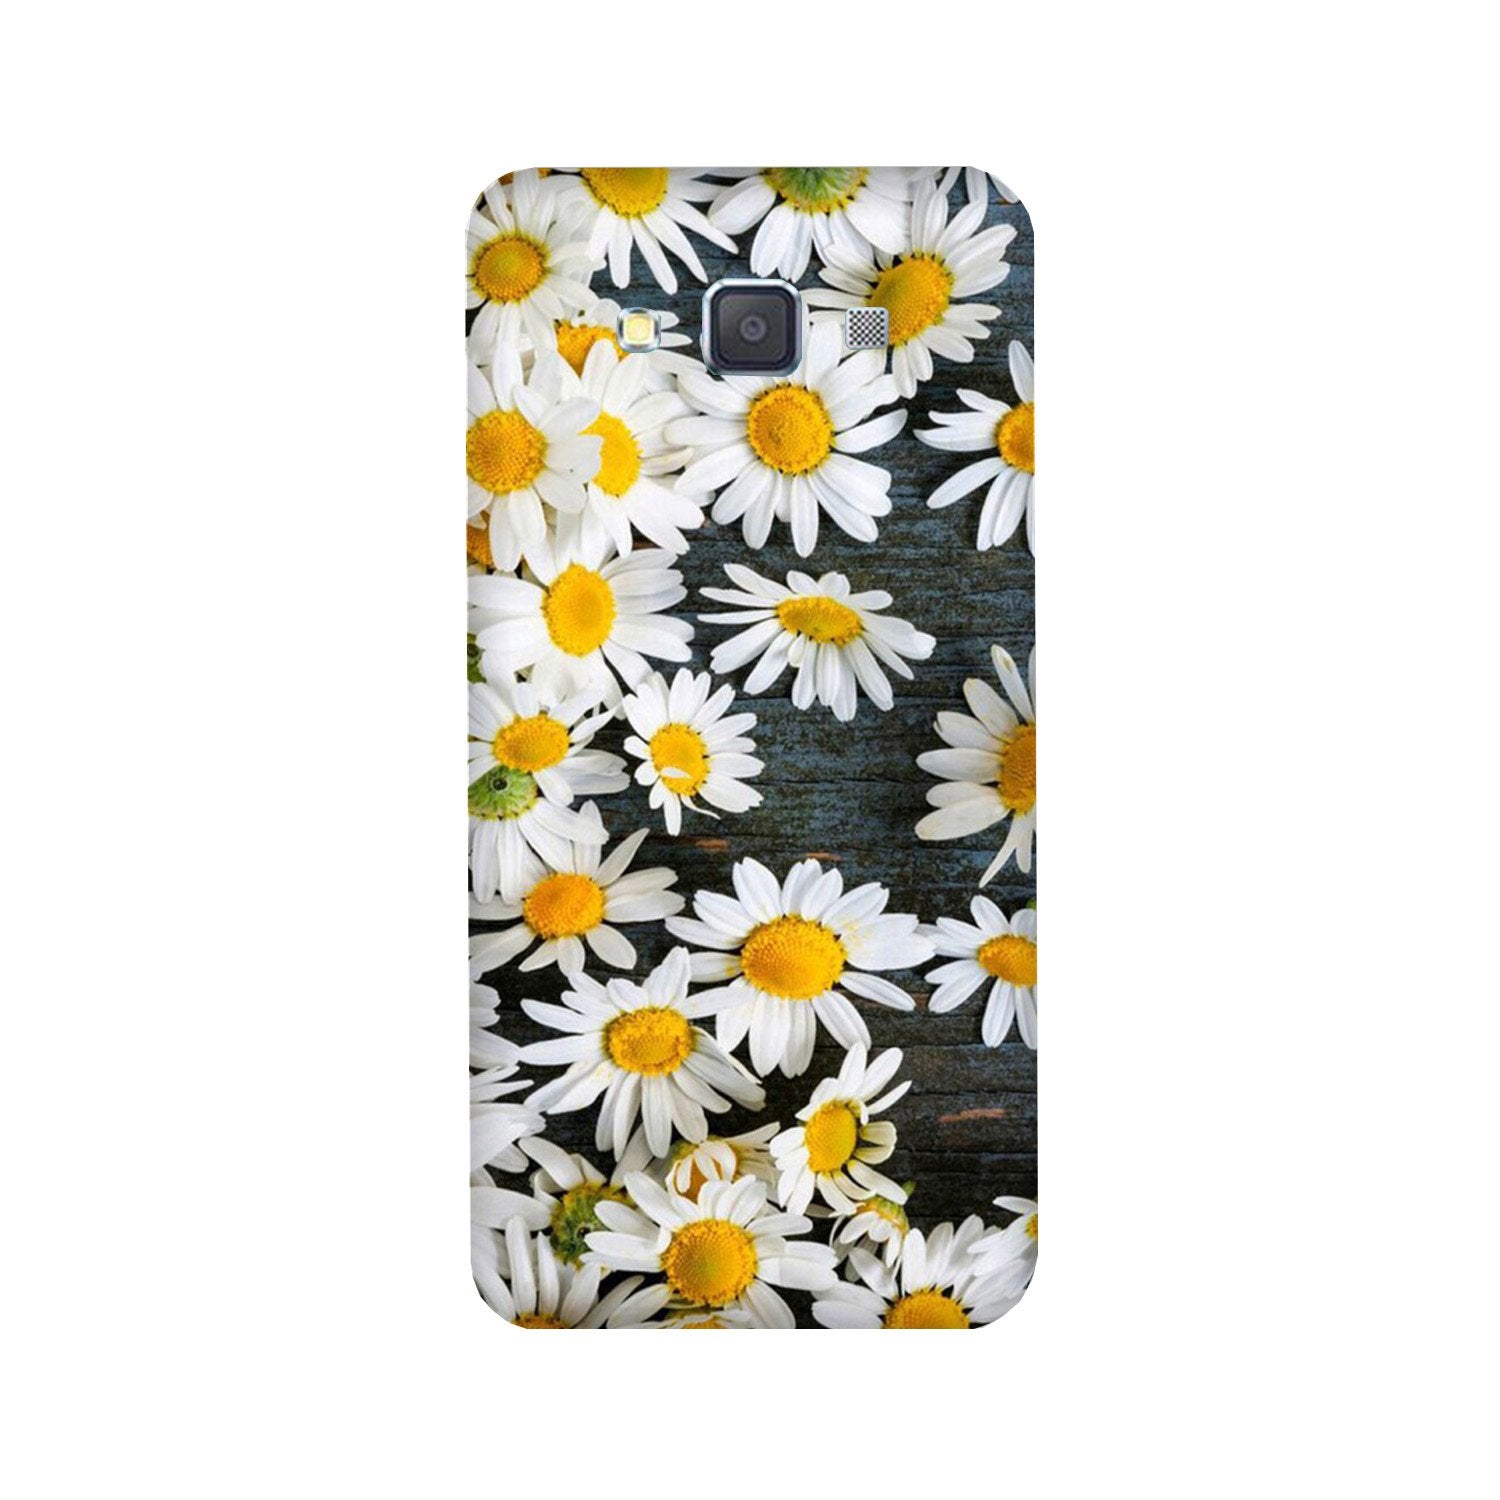 White flowers2 Case for Galaxy Grand Prime